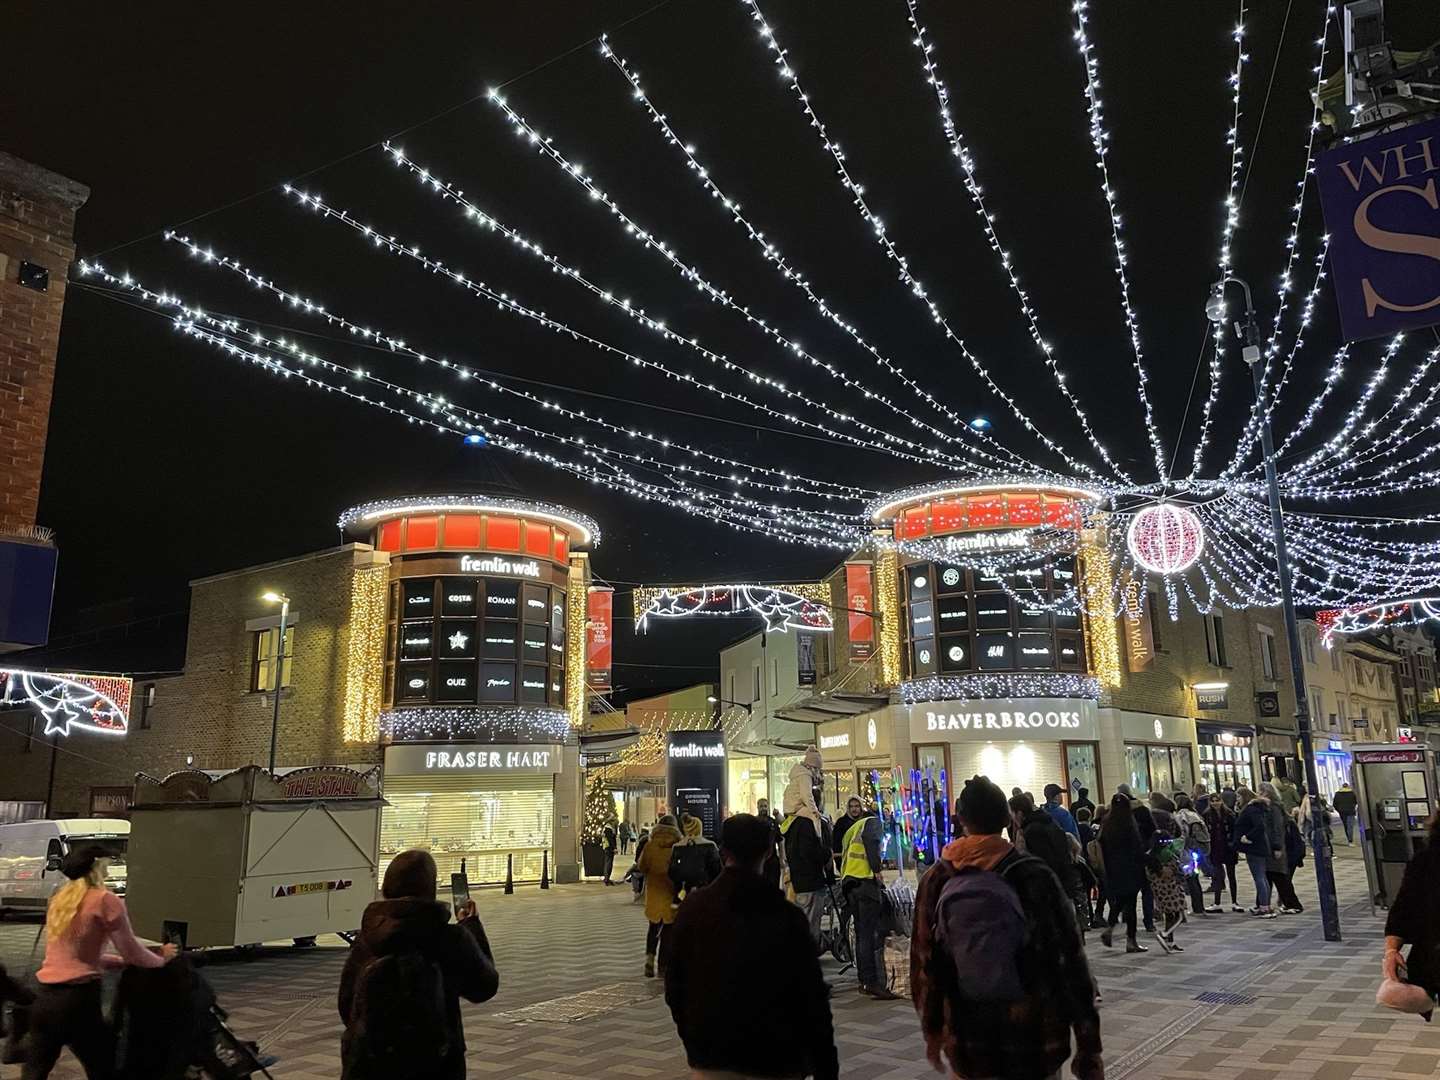 The kmfm team will be visiting Maidstone for the Christmas lights switch on. Picture: Gala Lights